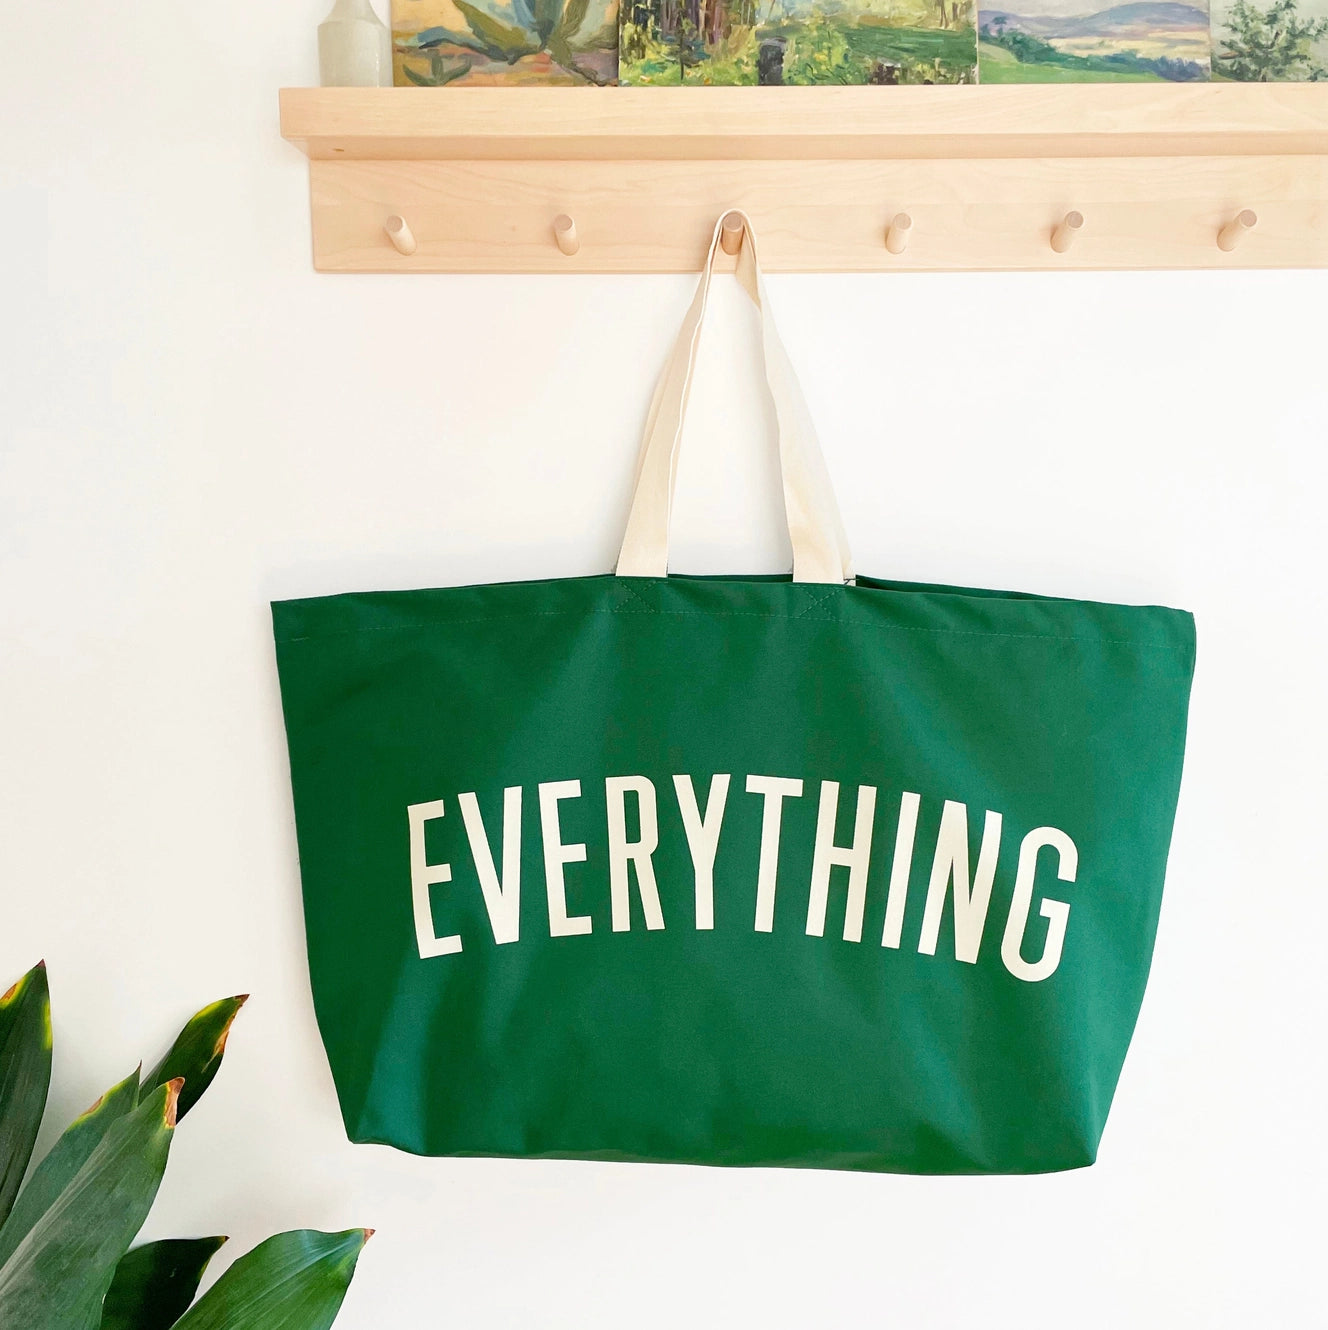 Everything Really Big Canvas Tote Bag - Forest Green